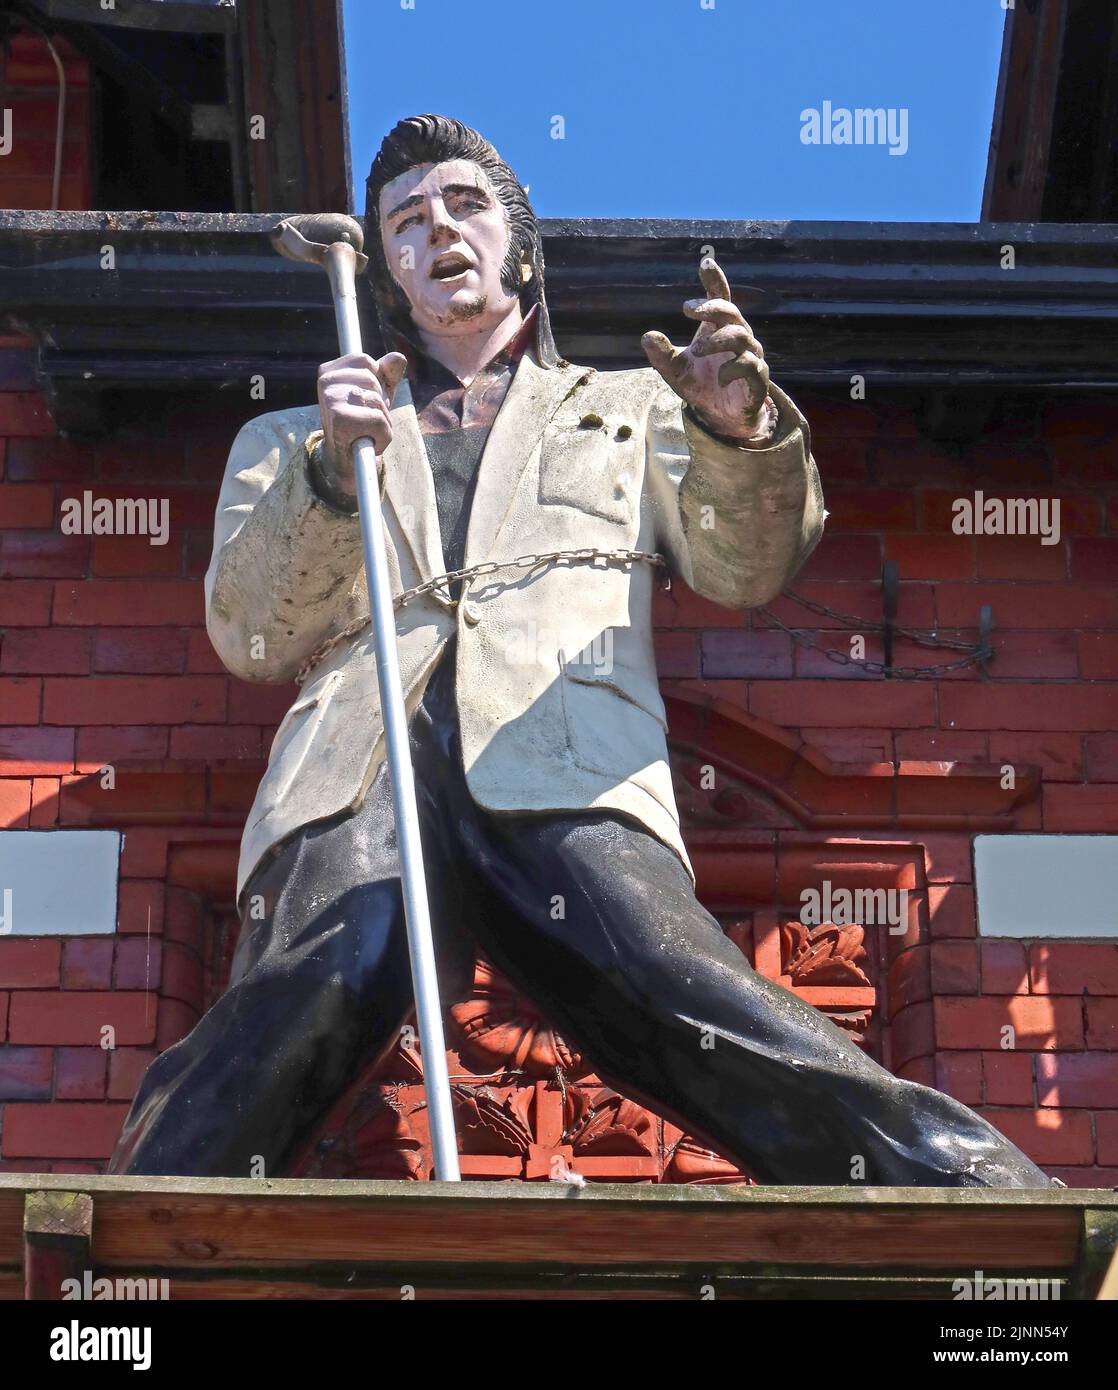 Elvis Presley statue, Railway Hotel, Pillory St, Nantwich, Cheshire, England, UK, CW5 5SS Stock Photo